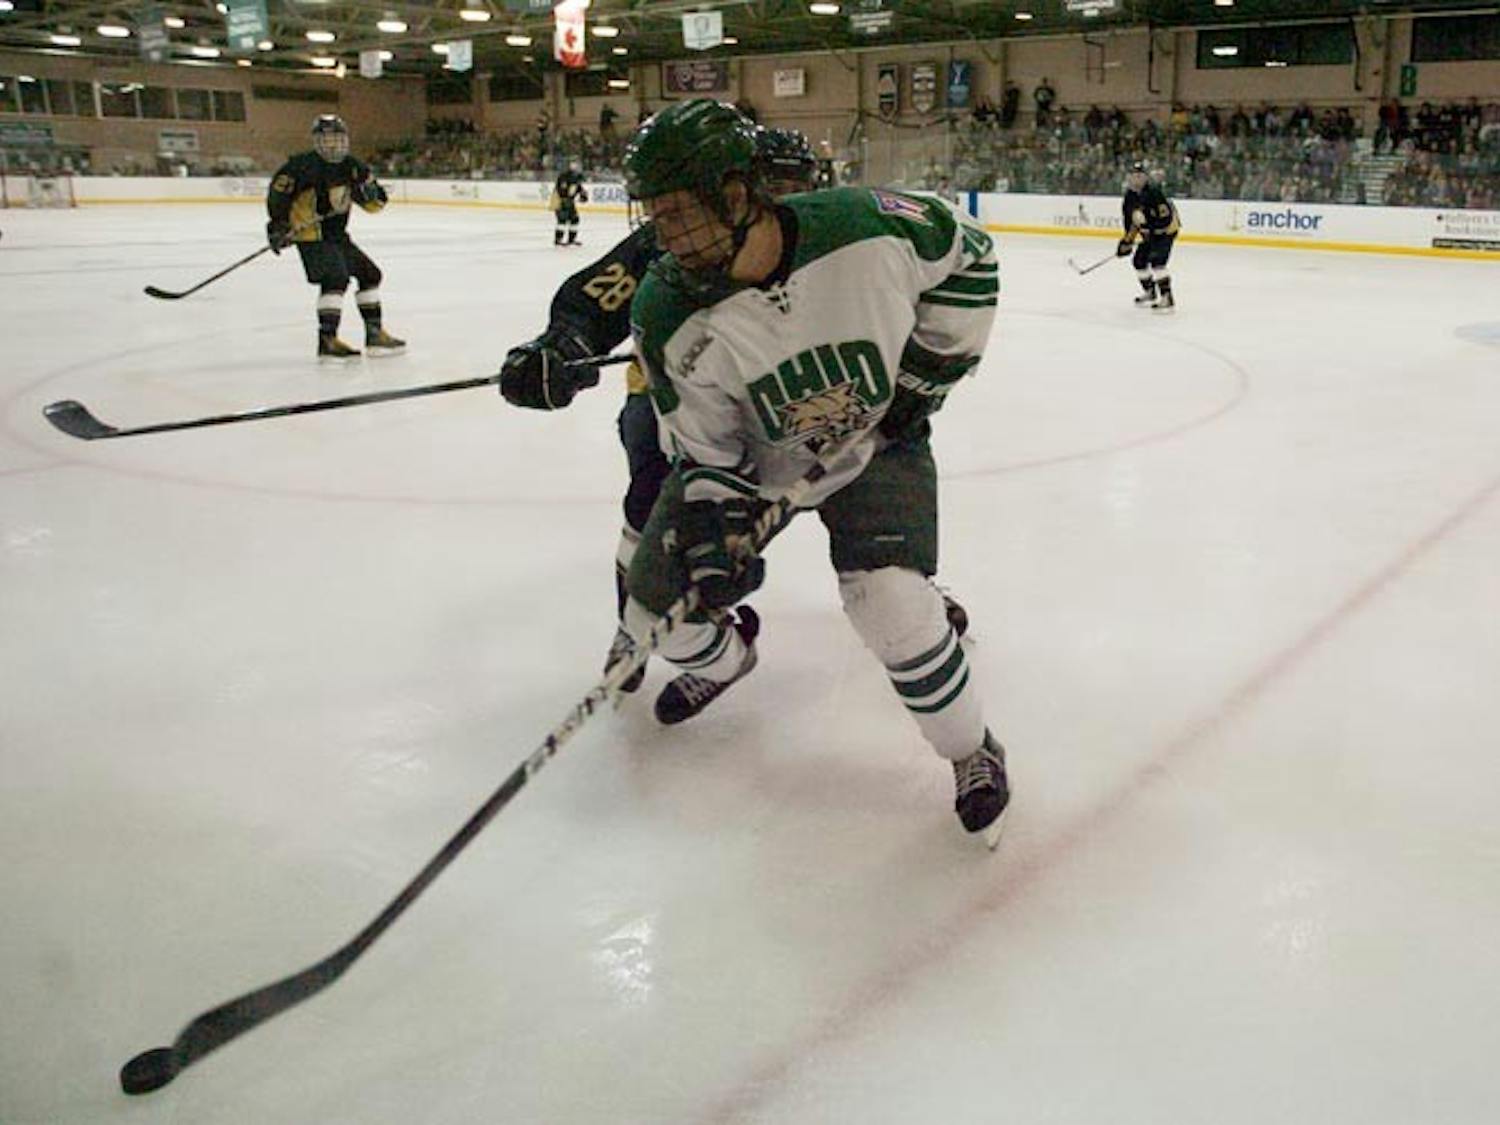 Hockey: Ohio topples WVU to remain undefeated  